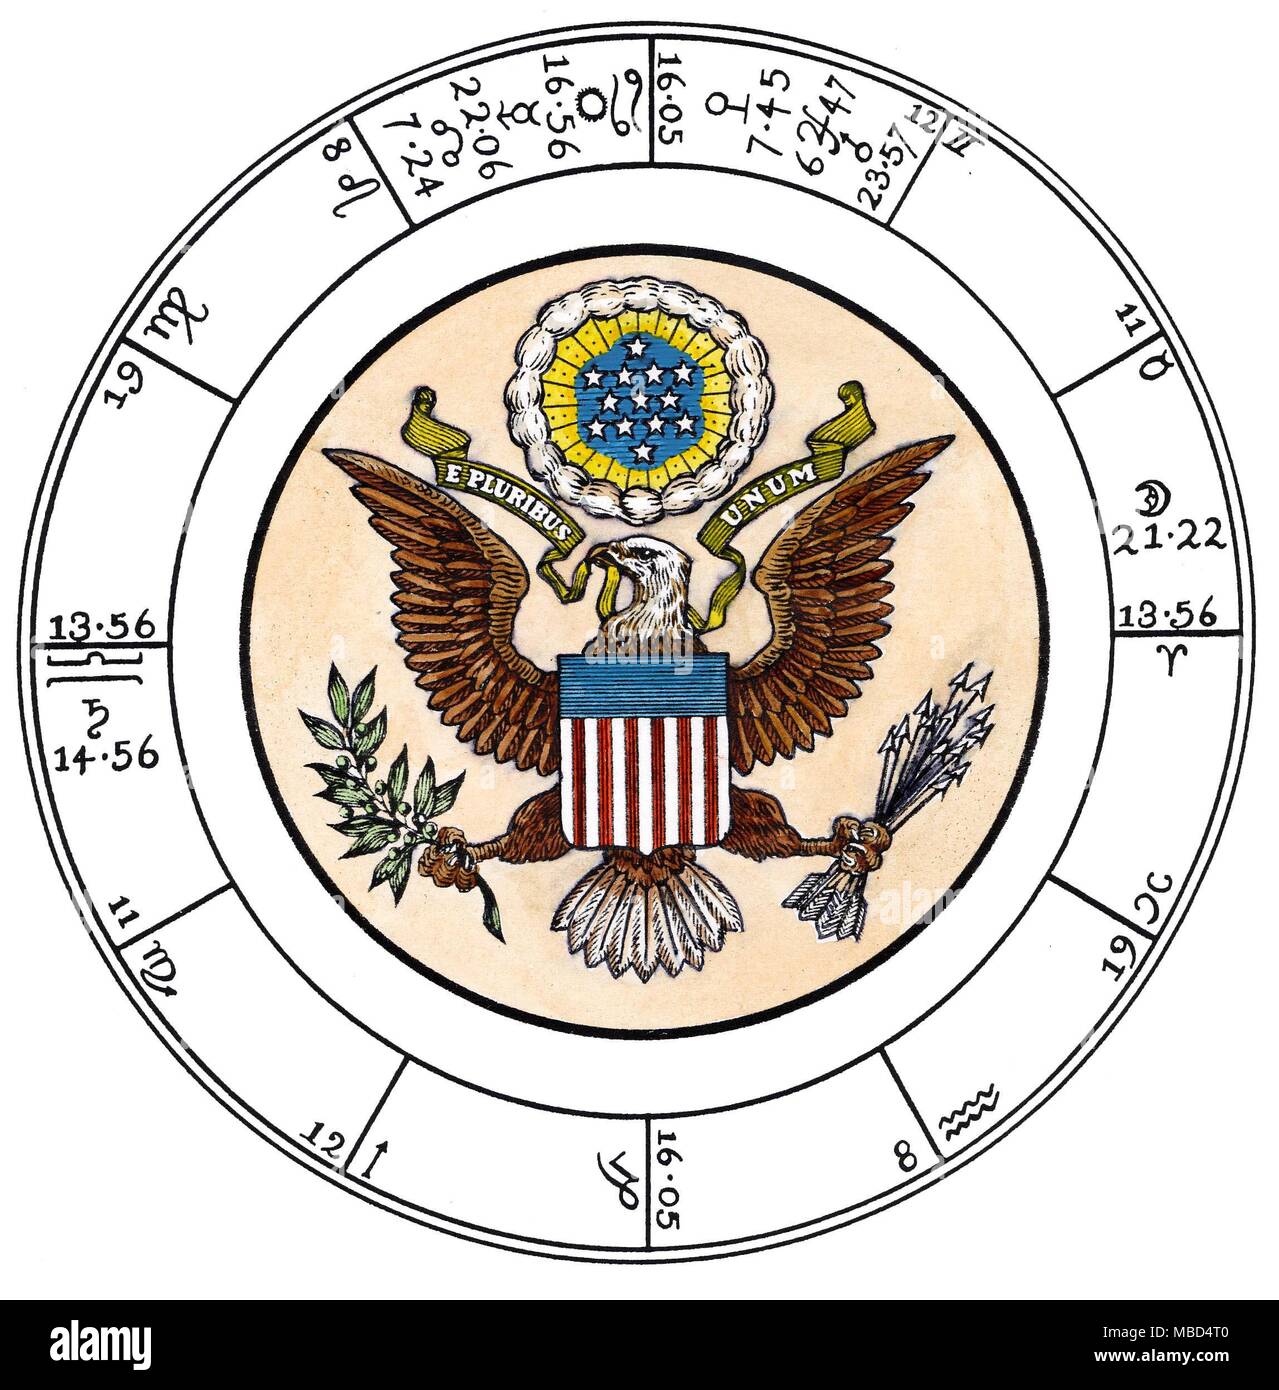 HOROSCOPES - UNITED STATES OF AMERICA The chart is cast for the moment of the public proclamation of the Declaration of Independence, in Philadelphia, at noon, on 8 July 1776. The date, time and place were enshrined in early American history by the Pennsylvania Evening Post, for Tuesday 7-9 July 1776. See also Edward Channing, A History of the United States, Vol. III The American Revolution 1761-1789, 1912, p.205. The suggestion, that this chart could be a valid horoscope of the United States, is proposed in Nicholas Campion, The Book of World Horoscopes, 1996 revised edn., pp.417-8. Stock Photo